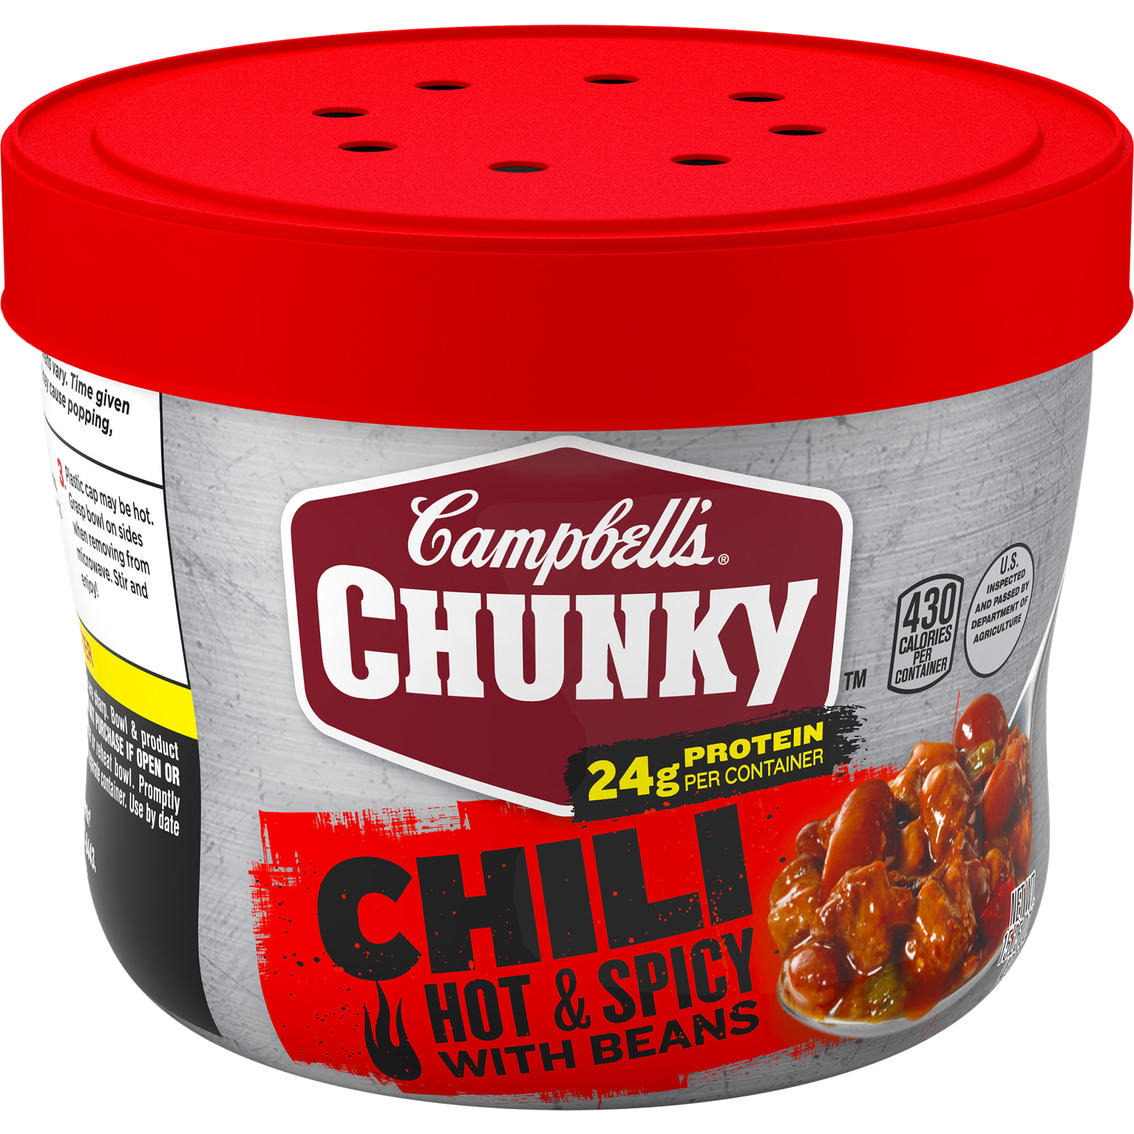 Campbell's Chunky Chili Hot & Spicy with Beans 15.25 oz.